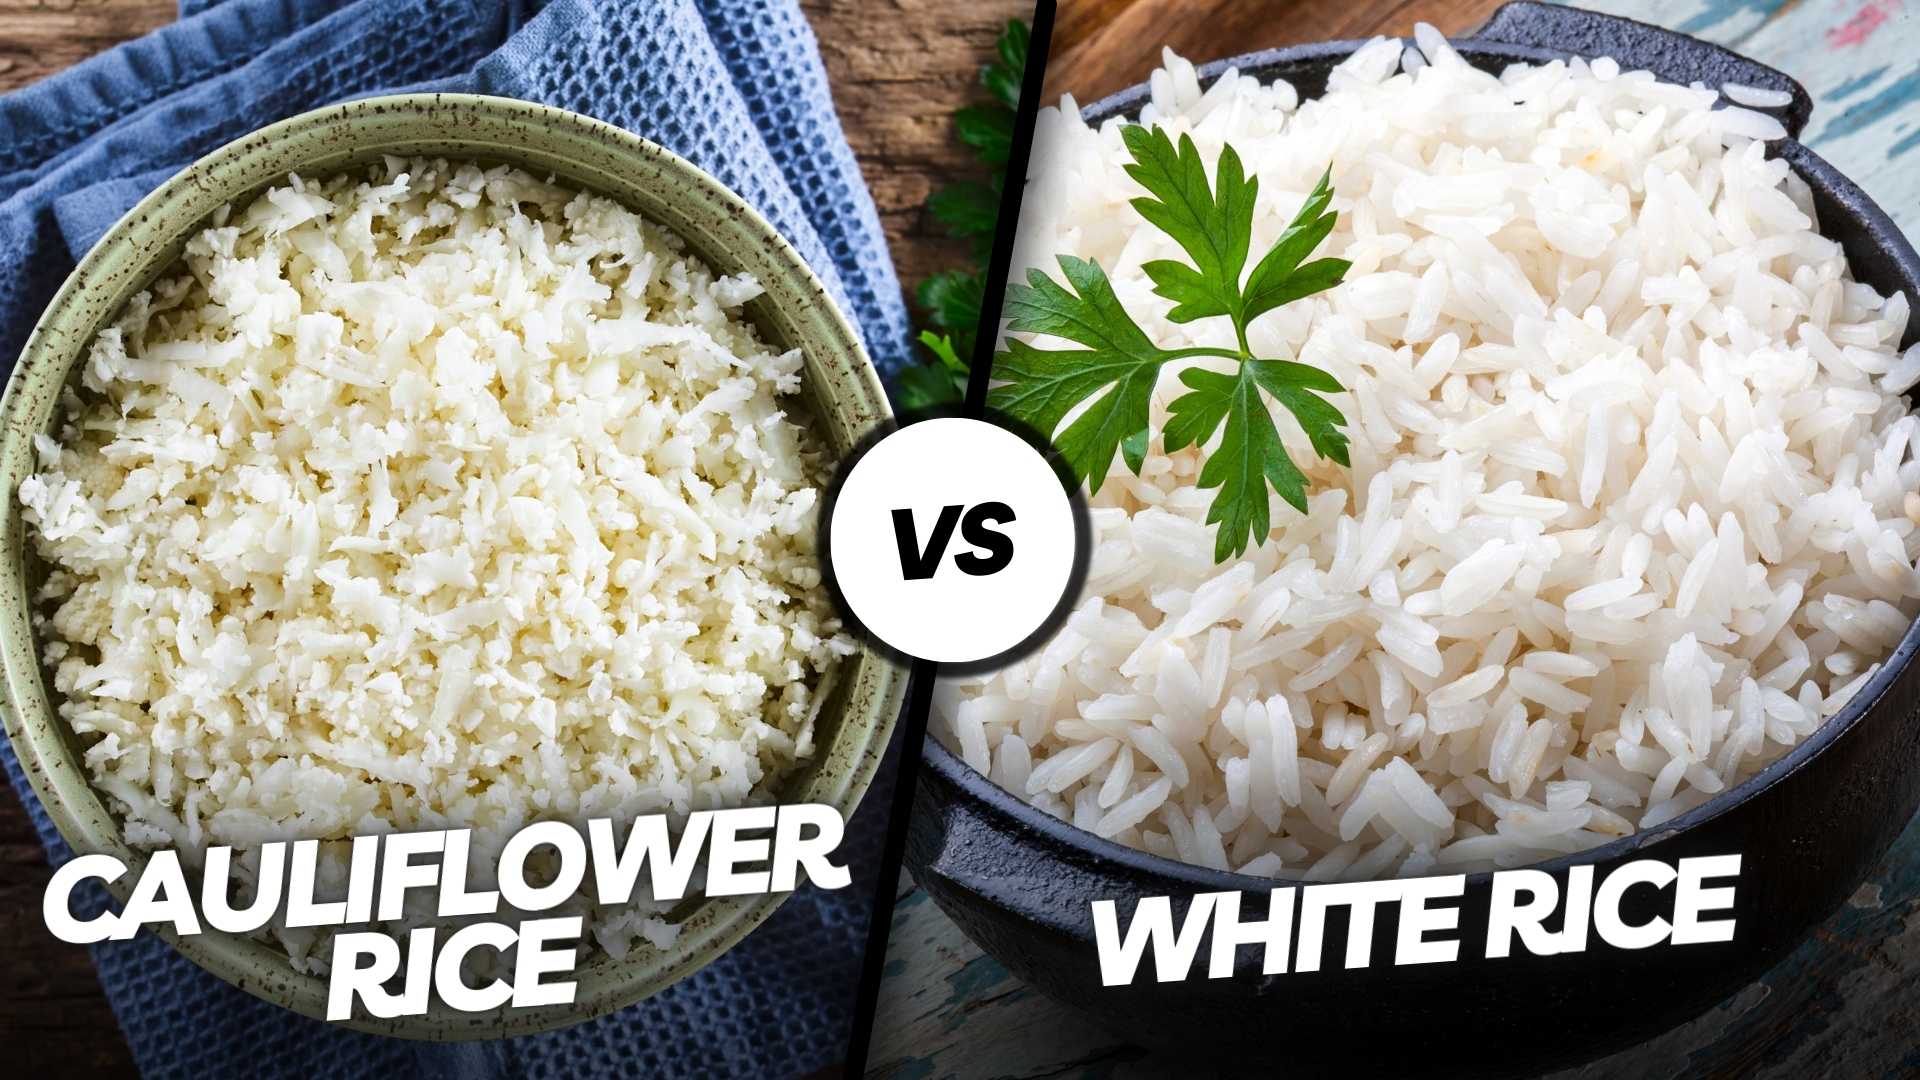 Cauliflower Rice vs White Rice: A Side-by-Side Comparison